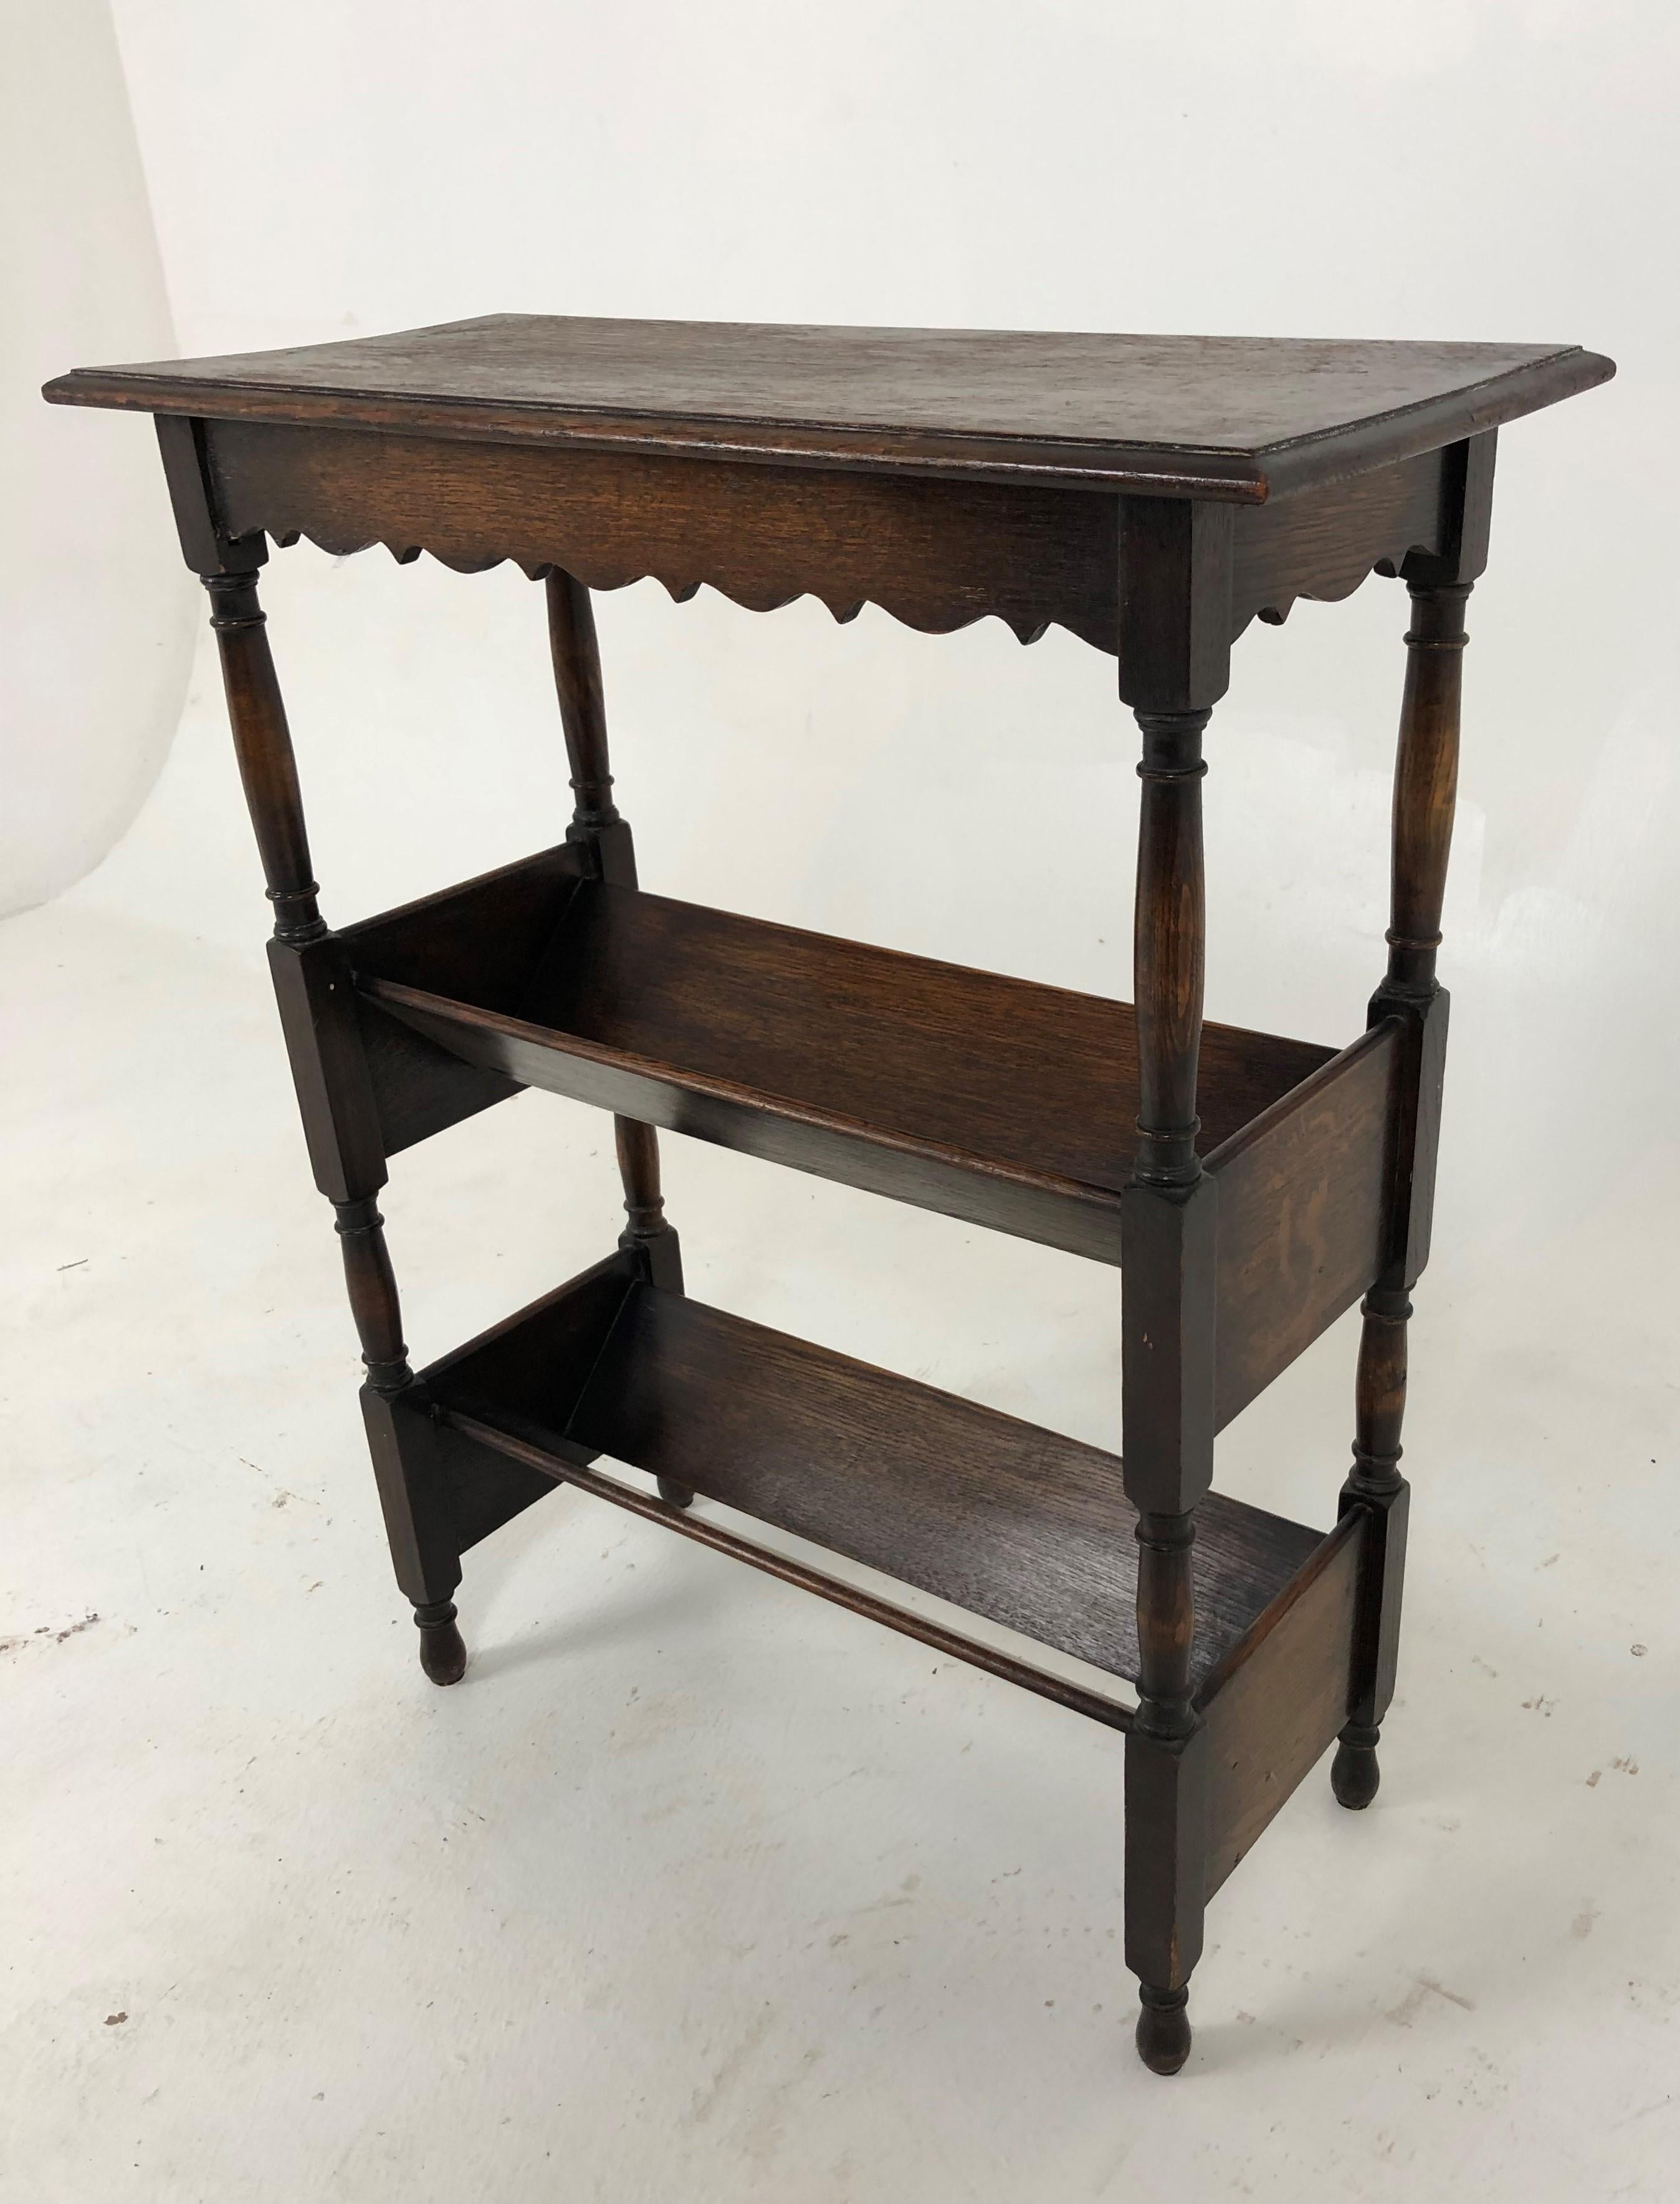 Antique arts and crafts oak book stand, book rack, hall table, bookcase, Scotland 1910, H839

Scotland 1910
Solid Oak
Original finish
Rectangular moulded top.
Wavy shaped frieze underneath.
Pair of book troughs.
All standing on four tall turned